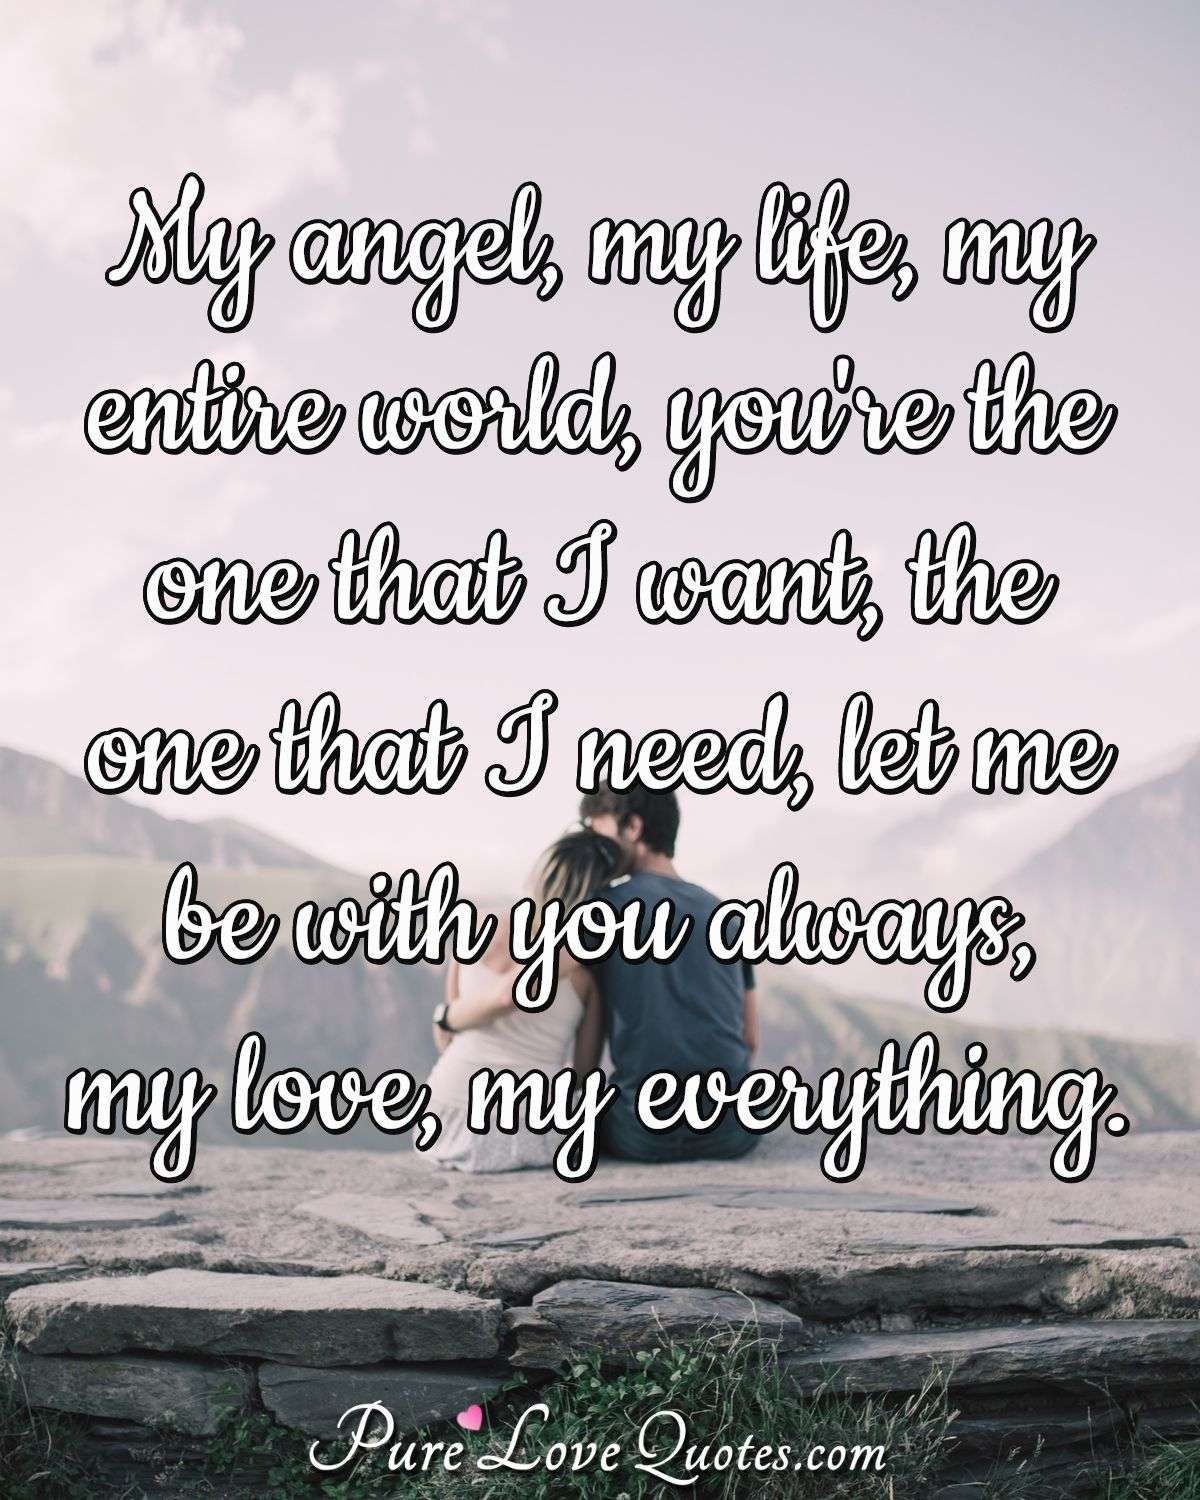 My angel, my life, my entire world, you're the one that I want, the one that I need, let me be with you always, my love, my everything. - Anonymous